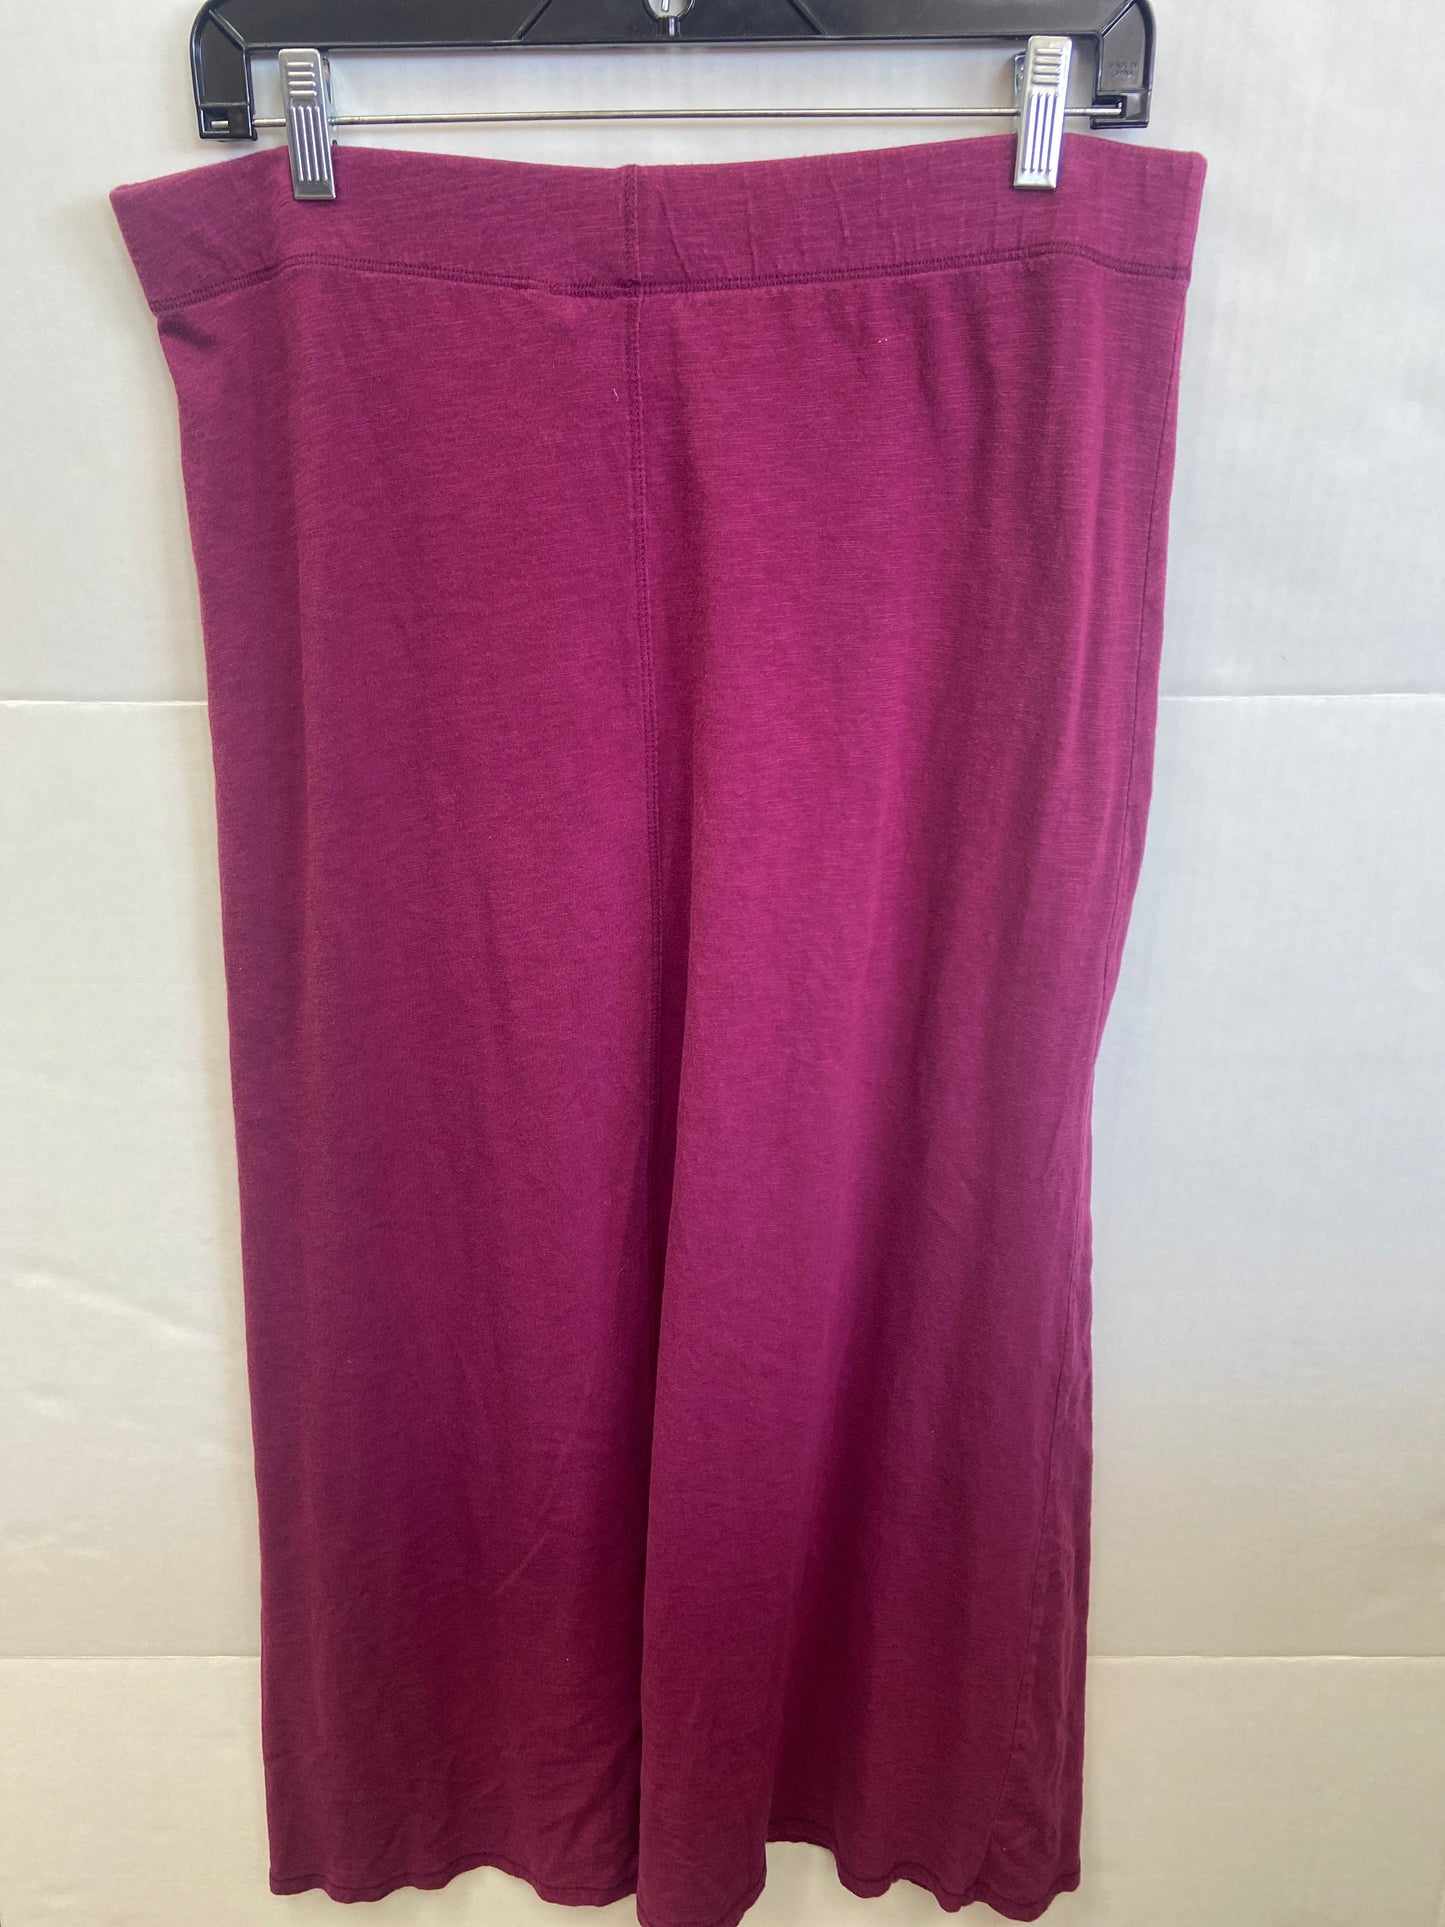 Skirt Maxi By Sonoma  Size: M